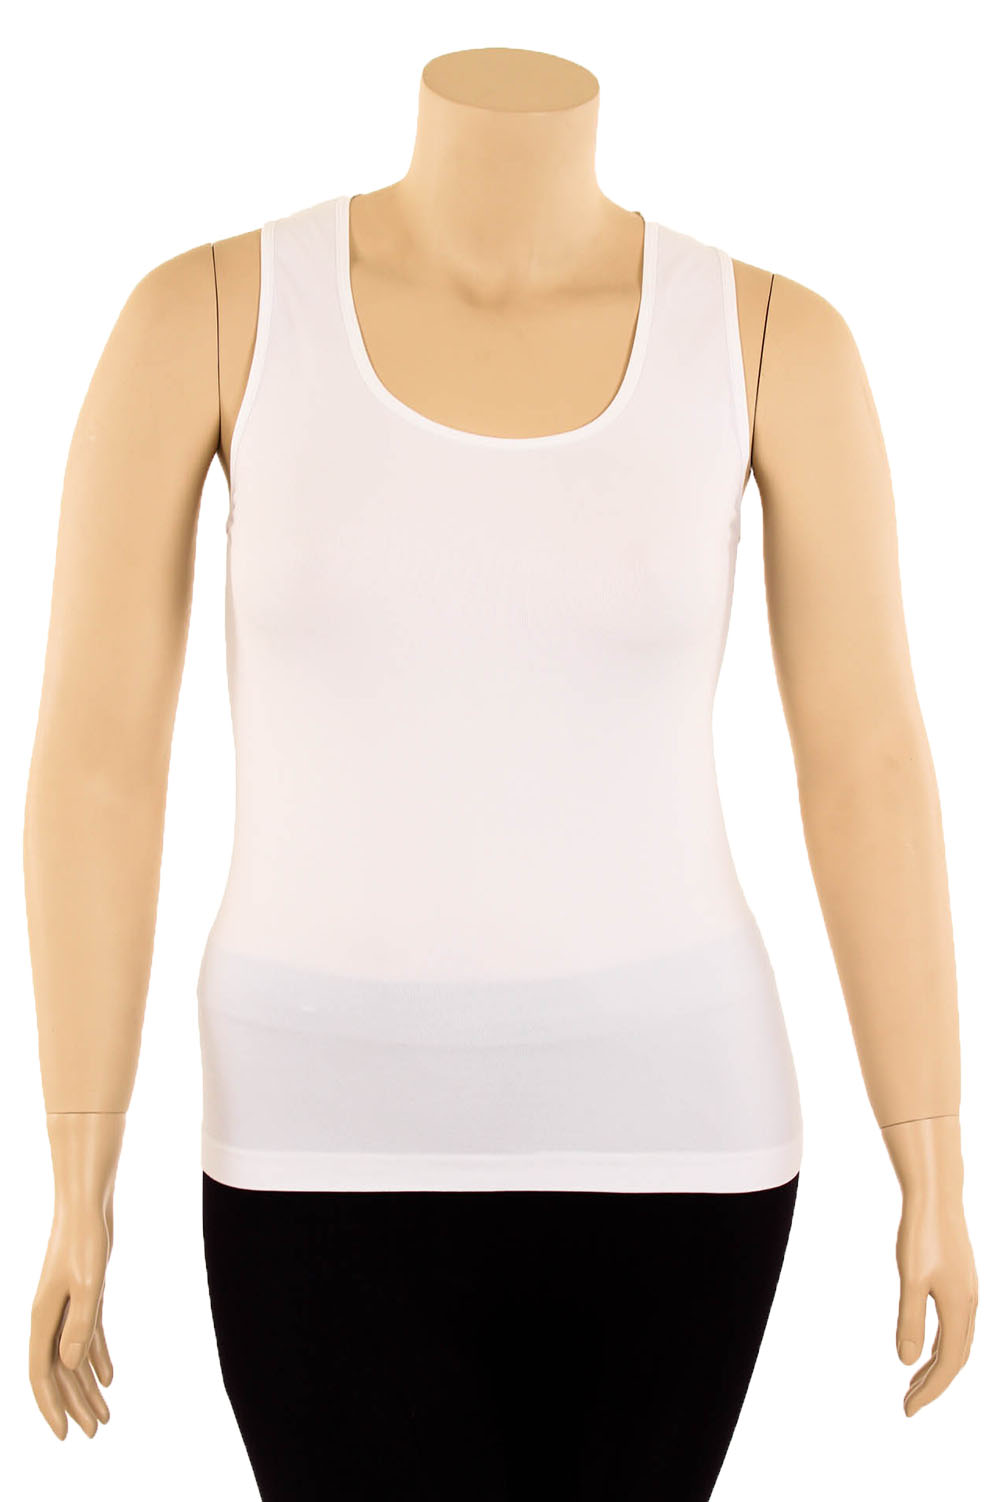 LAVRA Women's Cotton Camisole Cami Long Tank Top